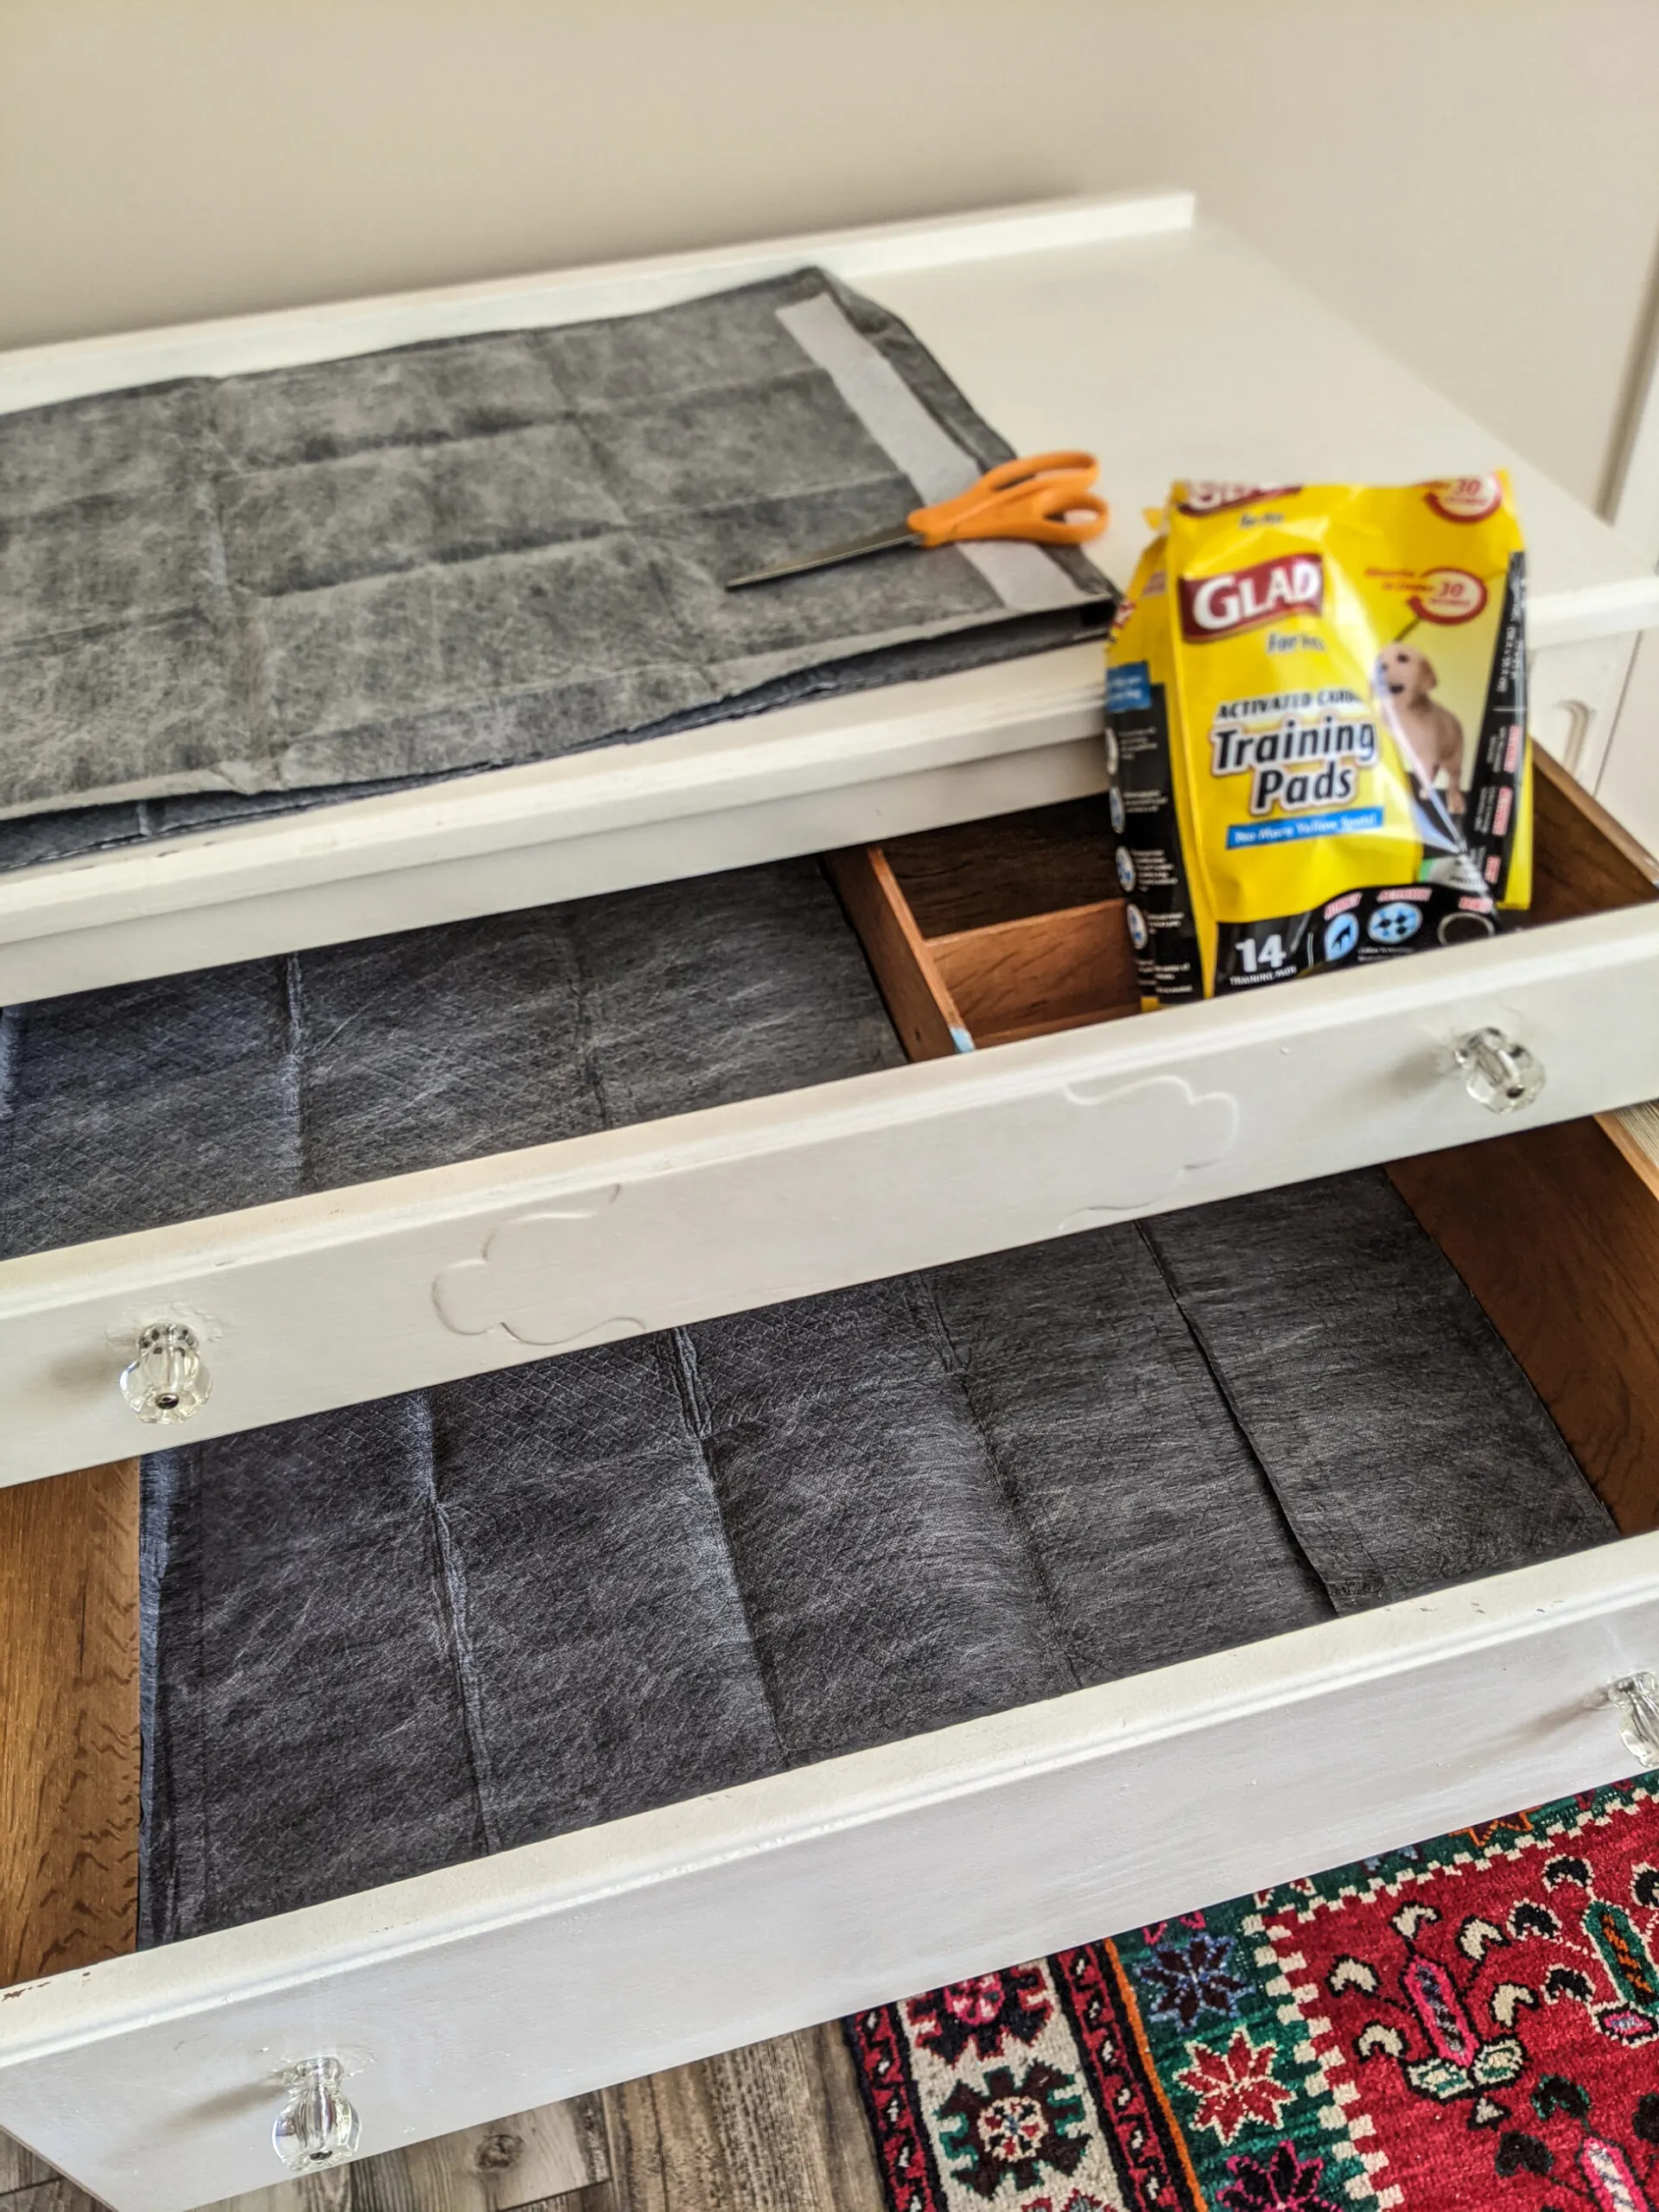 Wood dresser drawers lined with activated charcoal puppy pads.